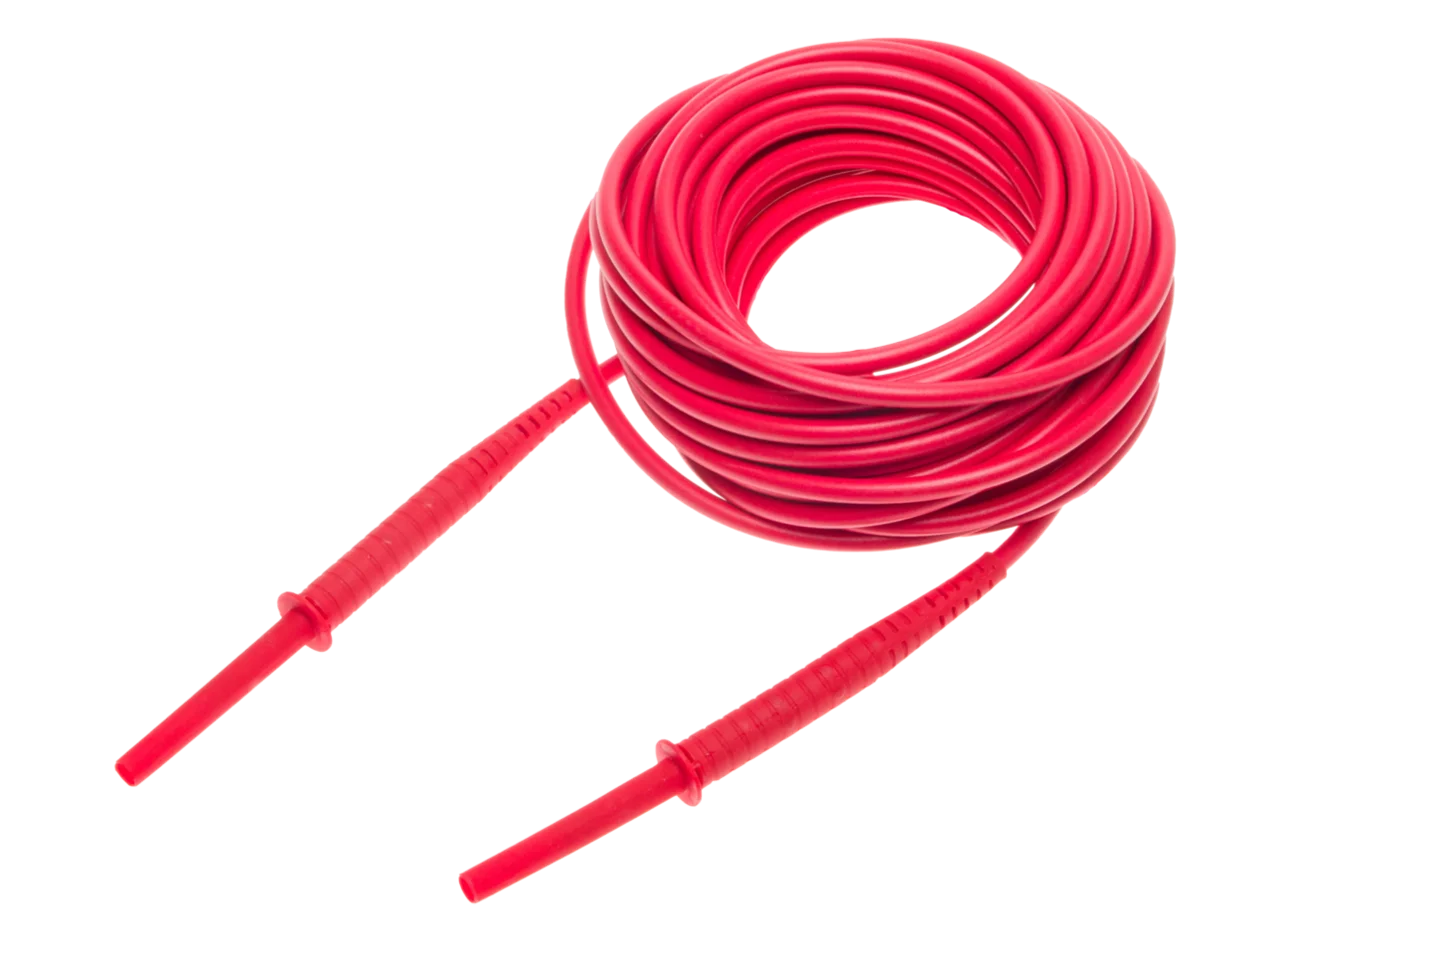 Test lead 15 m red 10 kV with banana plugs